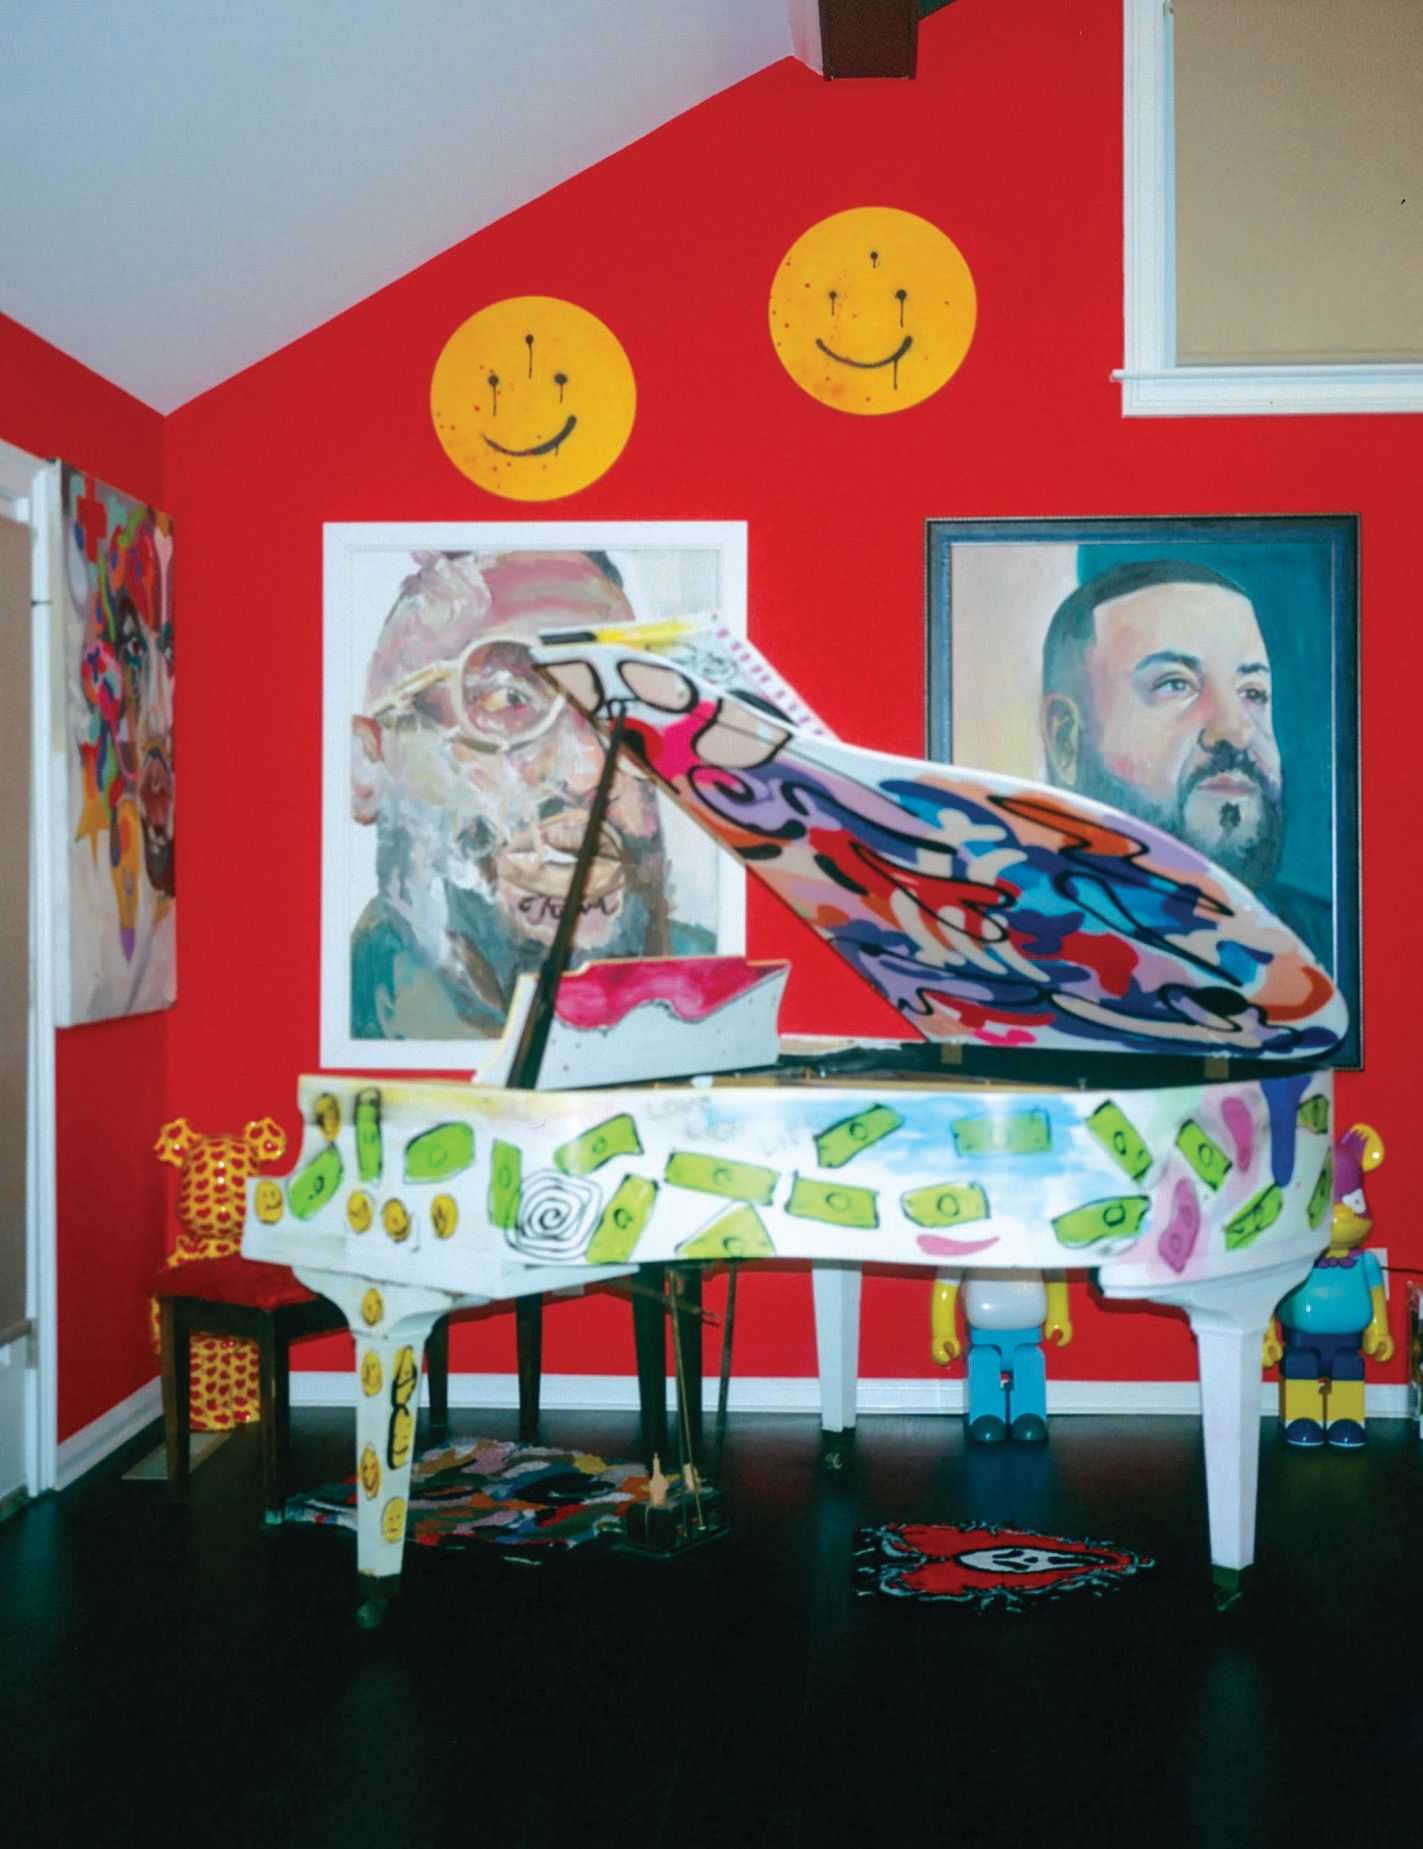 Interior of Westside Gunn’s home featuring DNTWATCHTV’s “Buffalo Kids”
piano and Mariella Angela’s “Ross” (2021) and “Khaled” (2021) PHOTO BY @SNAPGOD